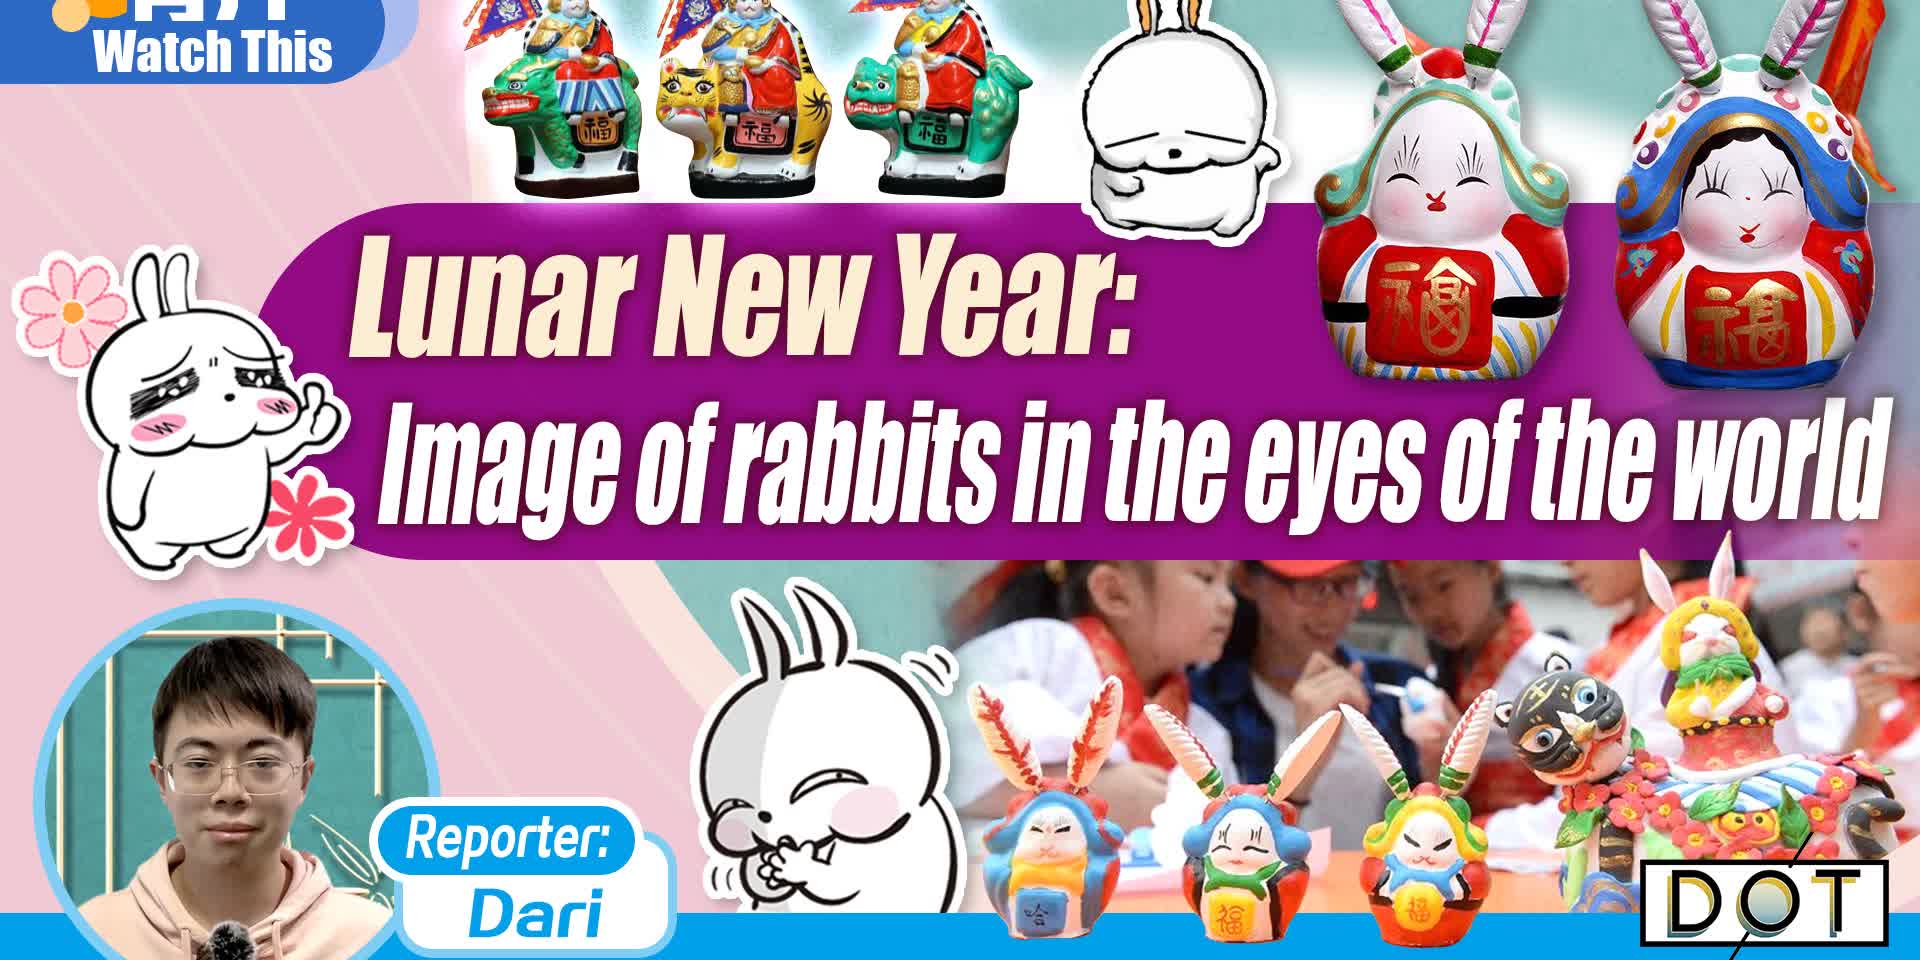 Watch This | Chinese Lunar New Year: Image of rabbits in the eyes of the world